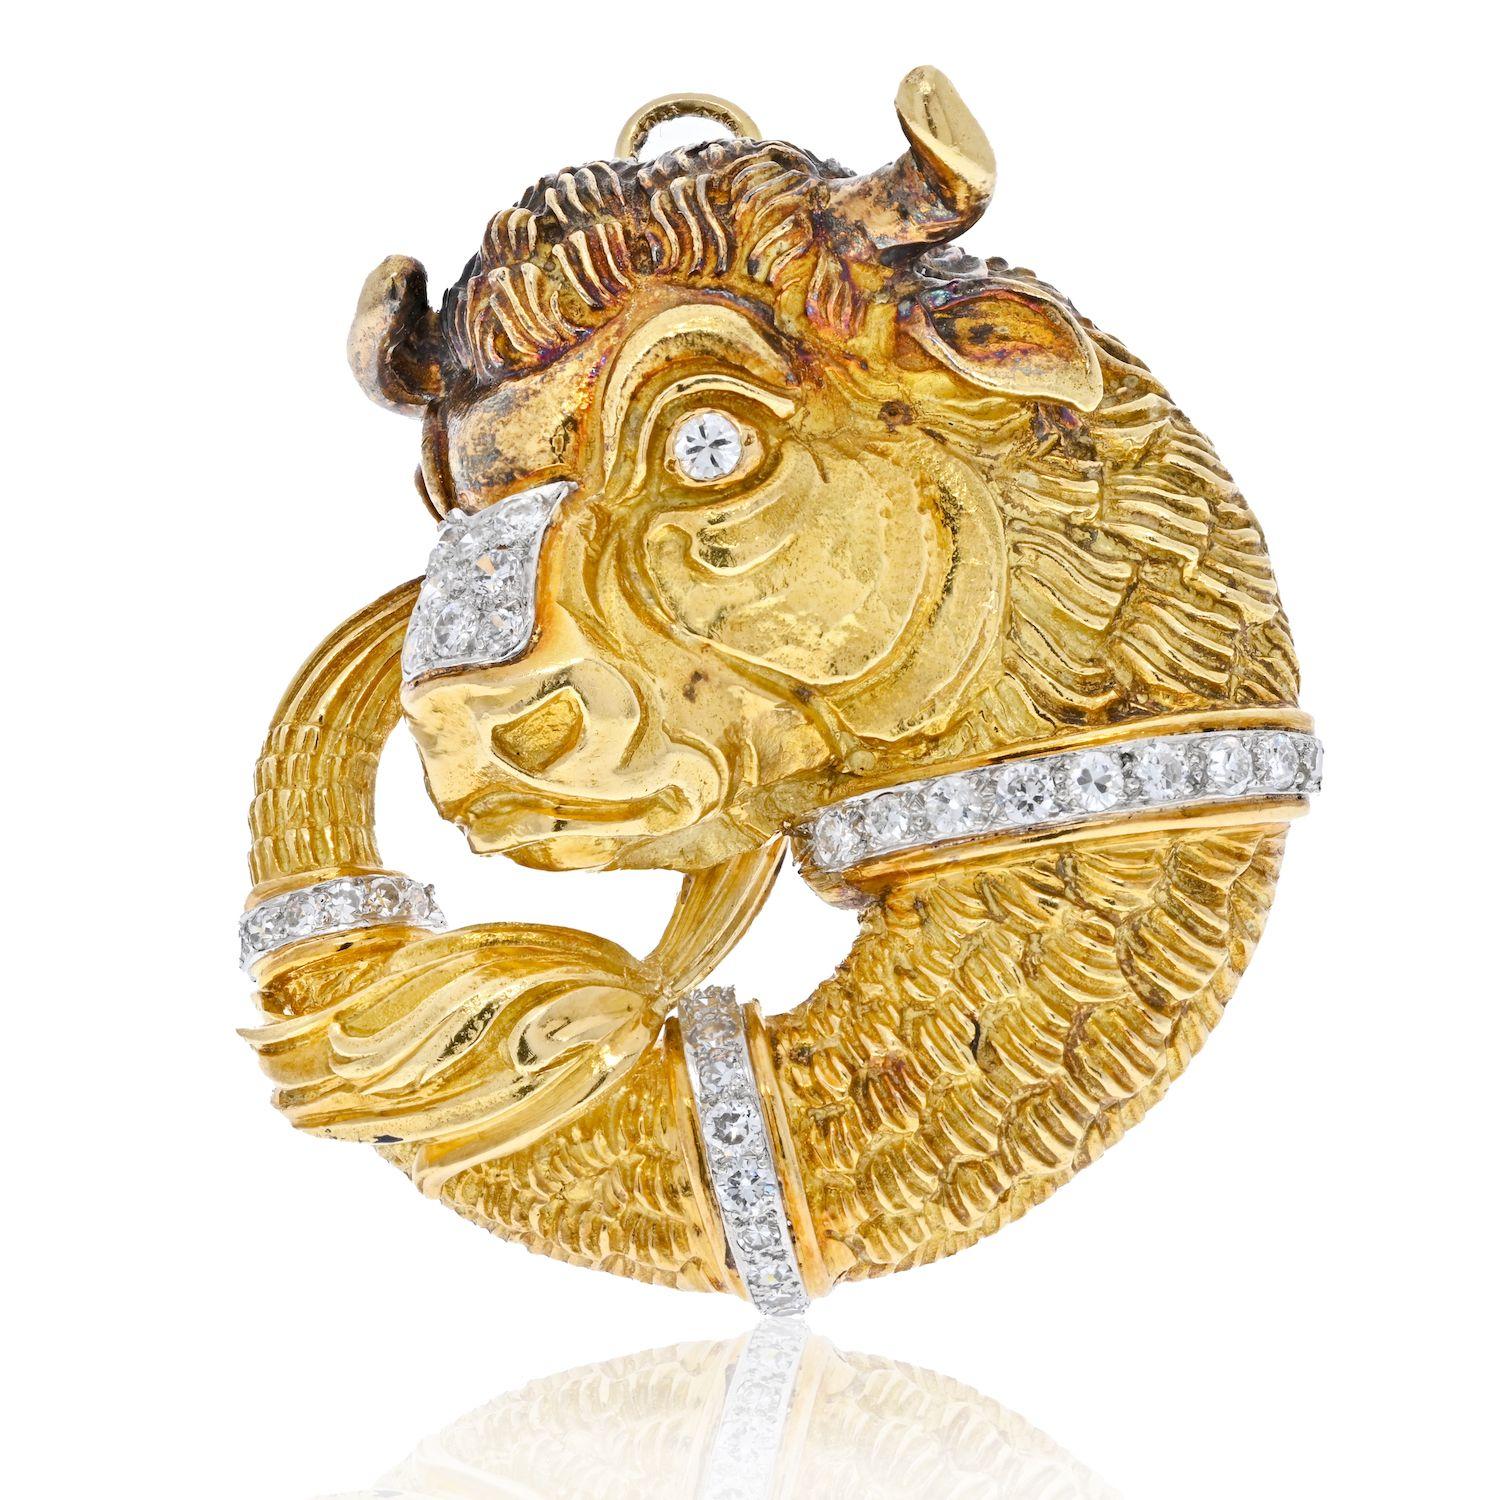 Bold and colorful pin/pendant created by David Webb in the 1970's. David Webb got a lot of inspiration in the Animals World and this Taurus pin is a great example of it.
Made of 18 karat yellow gold, the bison's eyes are accented with diamonds and